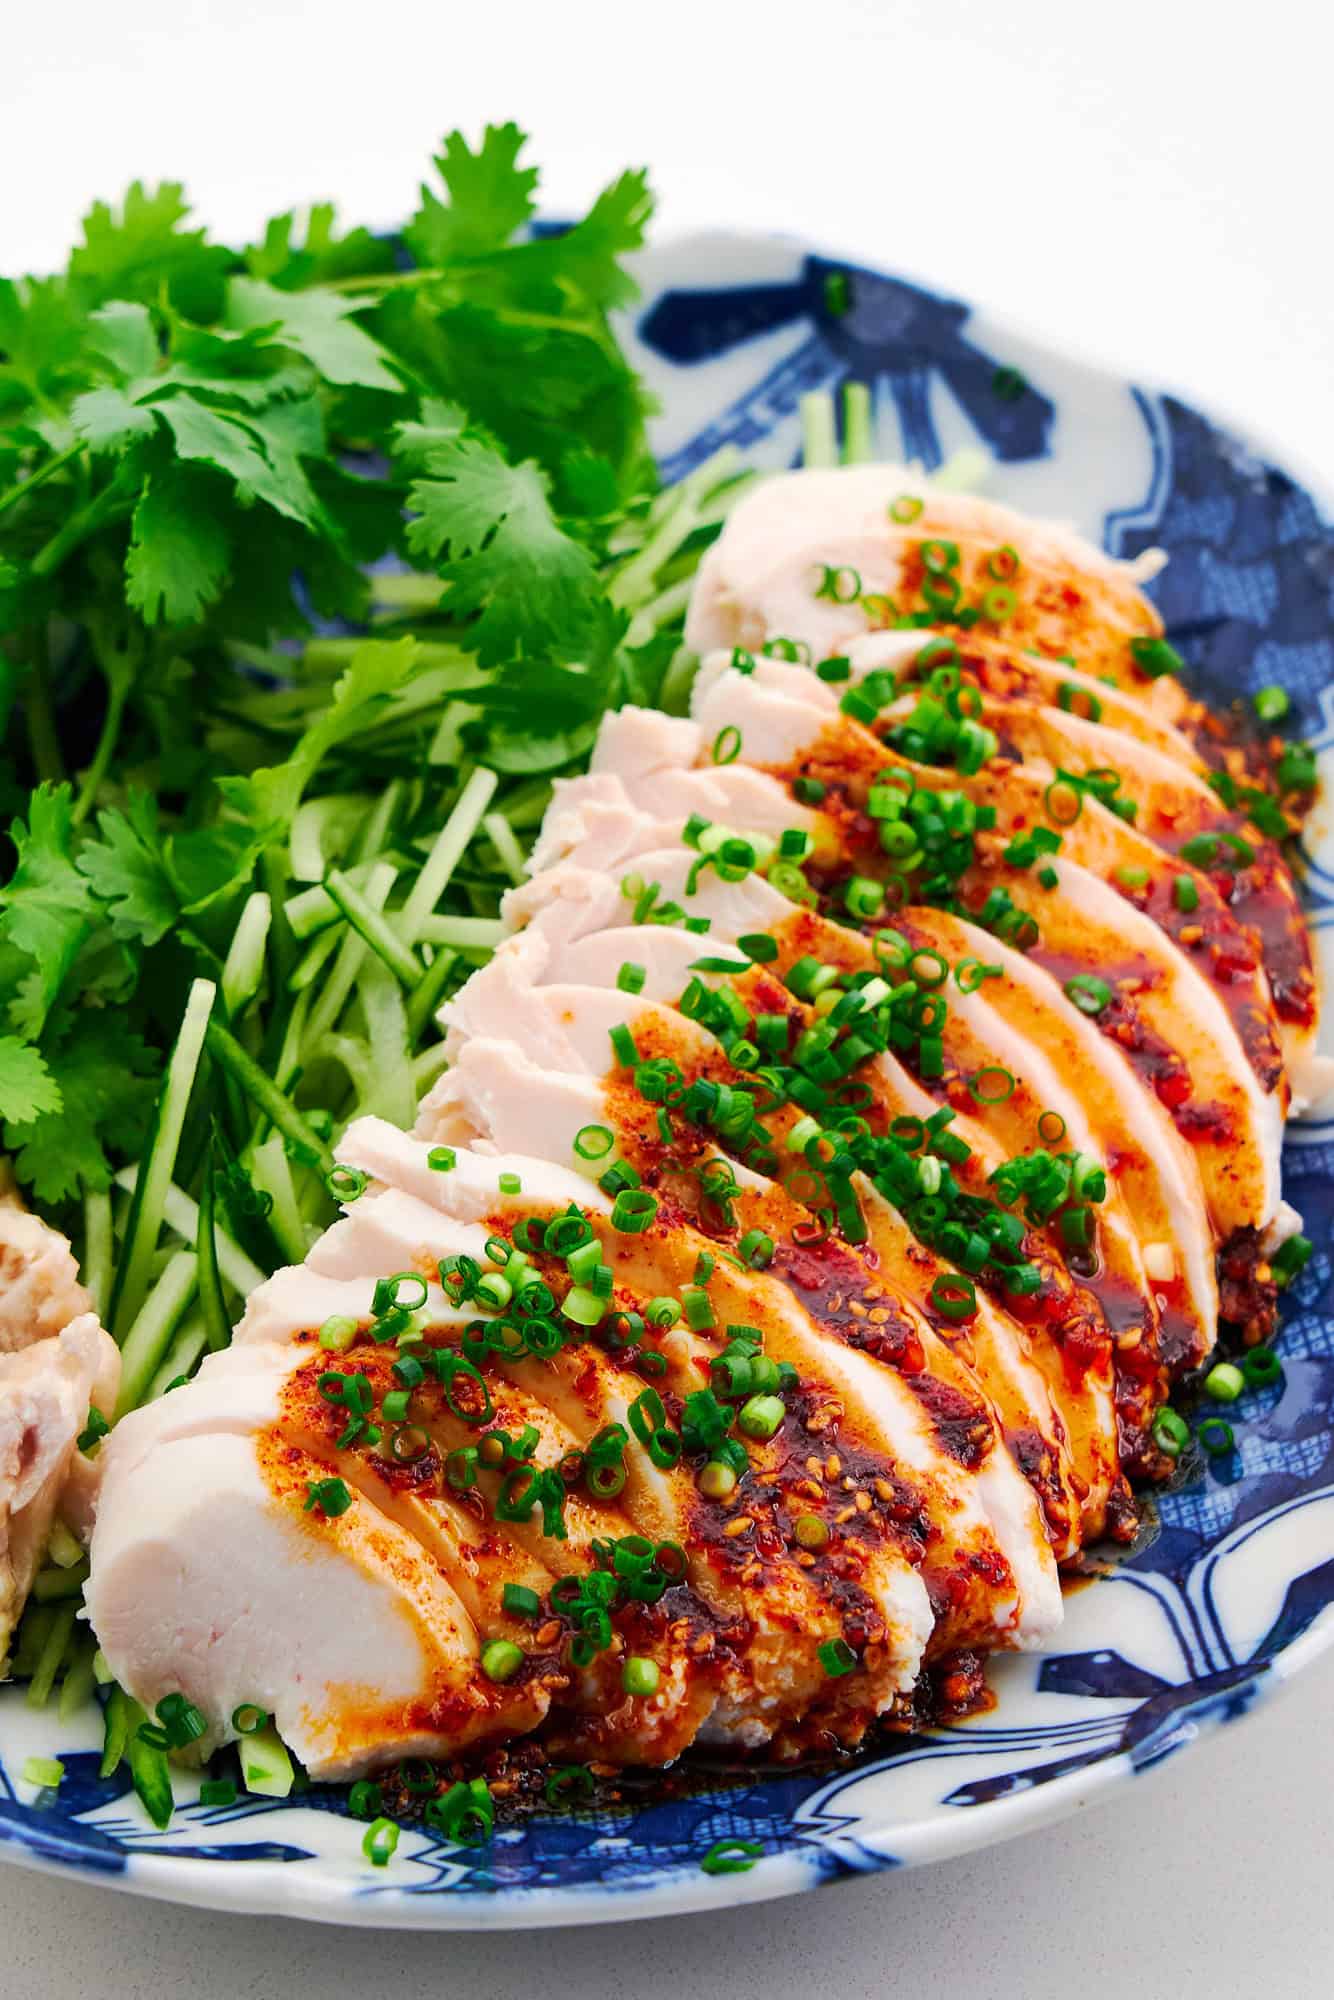 Poached chicken is delightful infused with ginger and topped with chili oil.